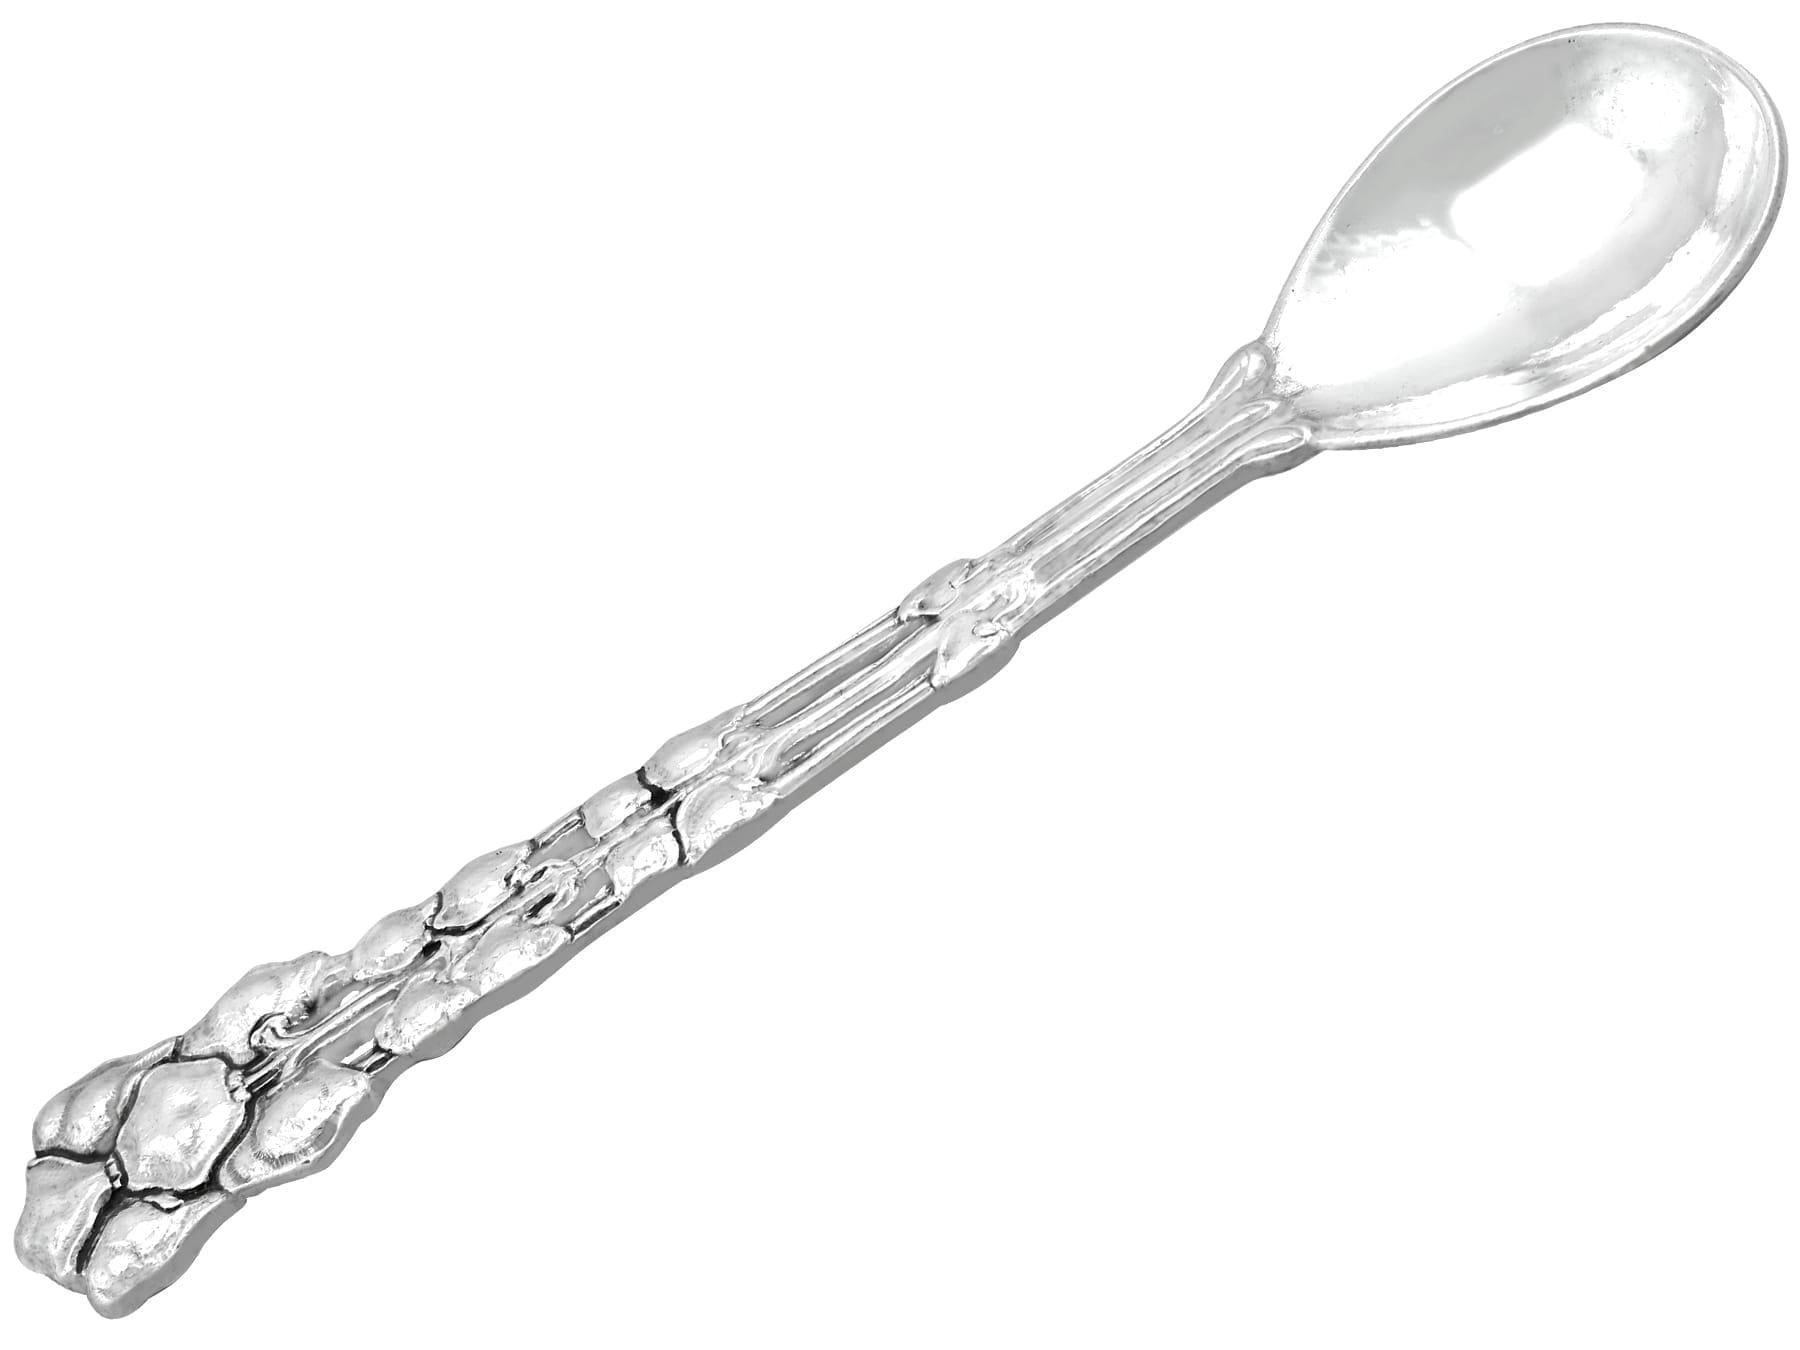 An exceptional, fine and impressive antique George V English cast sterling silver presentation spoon made by Alwyn Carr; an addition to our Arts and Crafts silverware collection

This exceptional antique George V cast sterling silver spoon has a